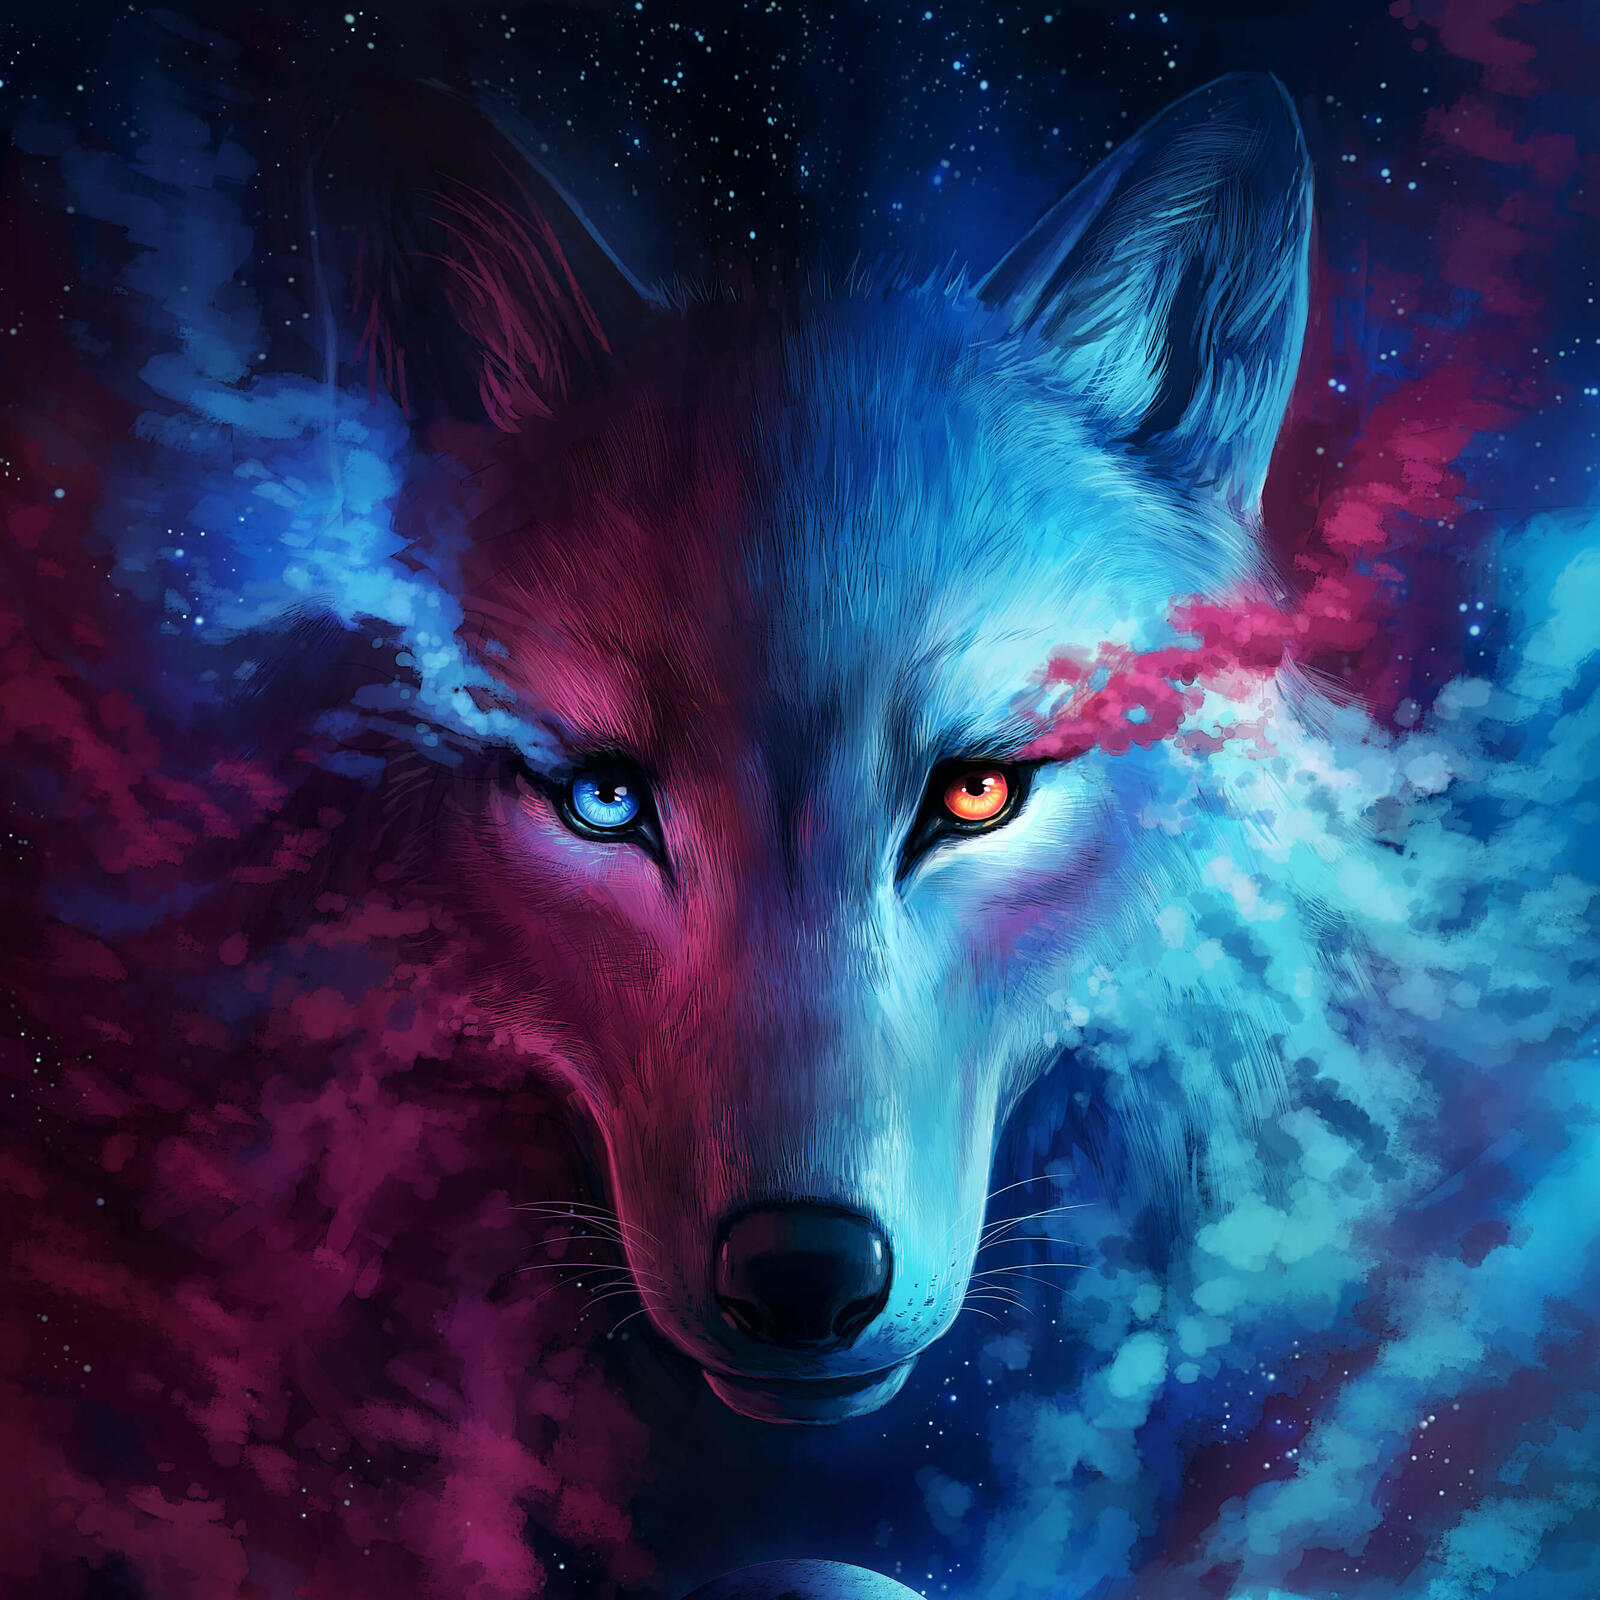 Wallpapers bright eyes fantasy the majestic wolf on the desktop